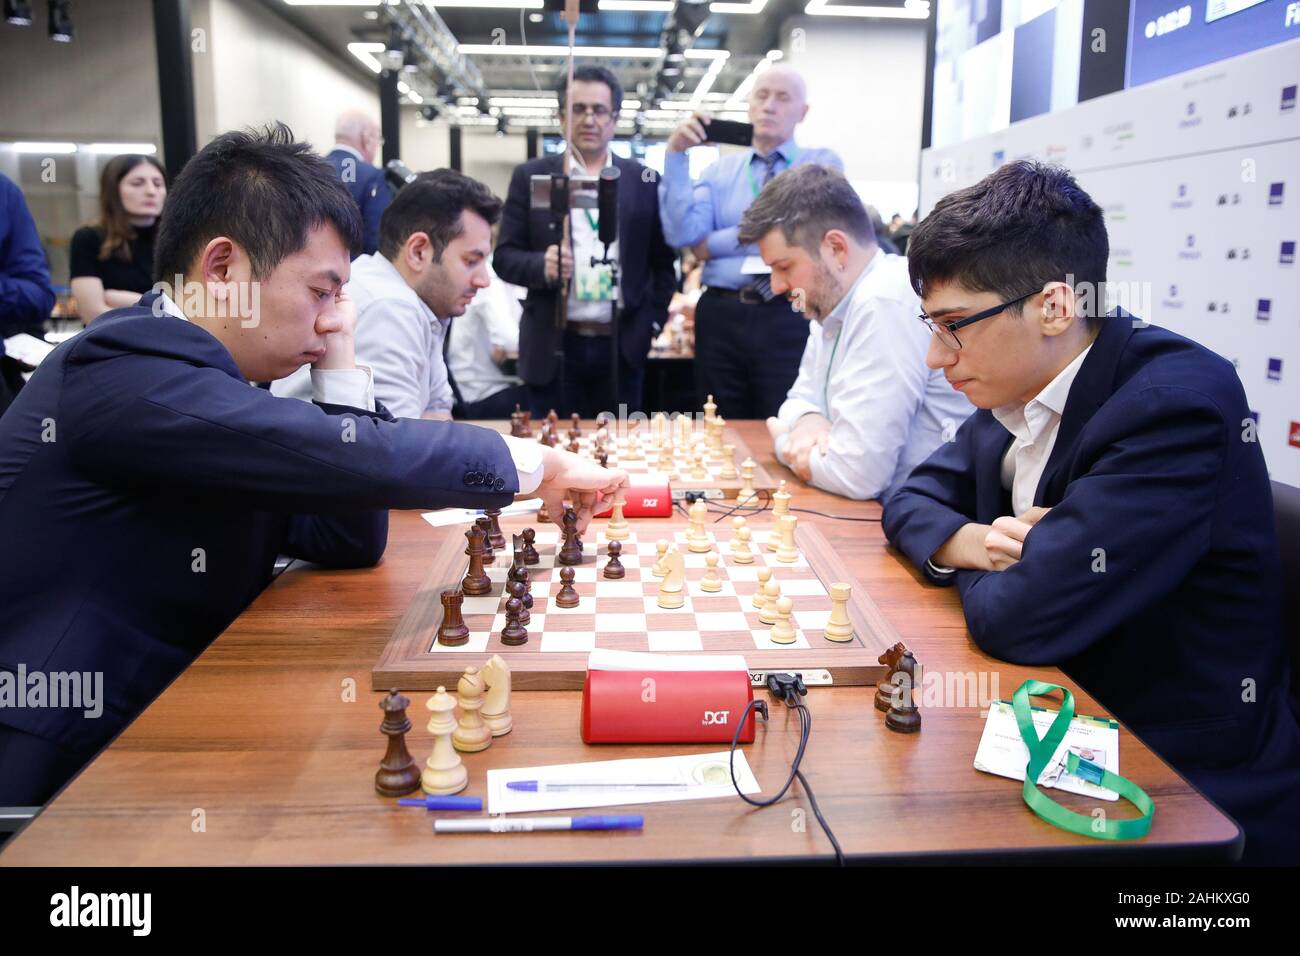 Moscow, Russia. 30th Dec, 2019. Wang Hao (L) of China and Alireza